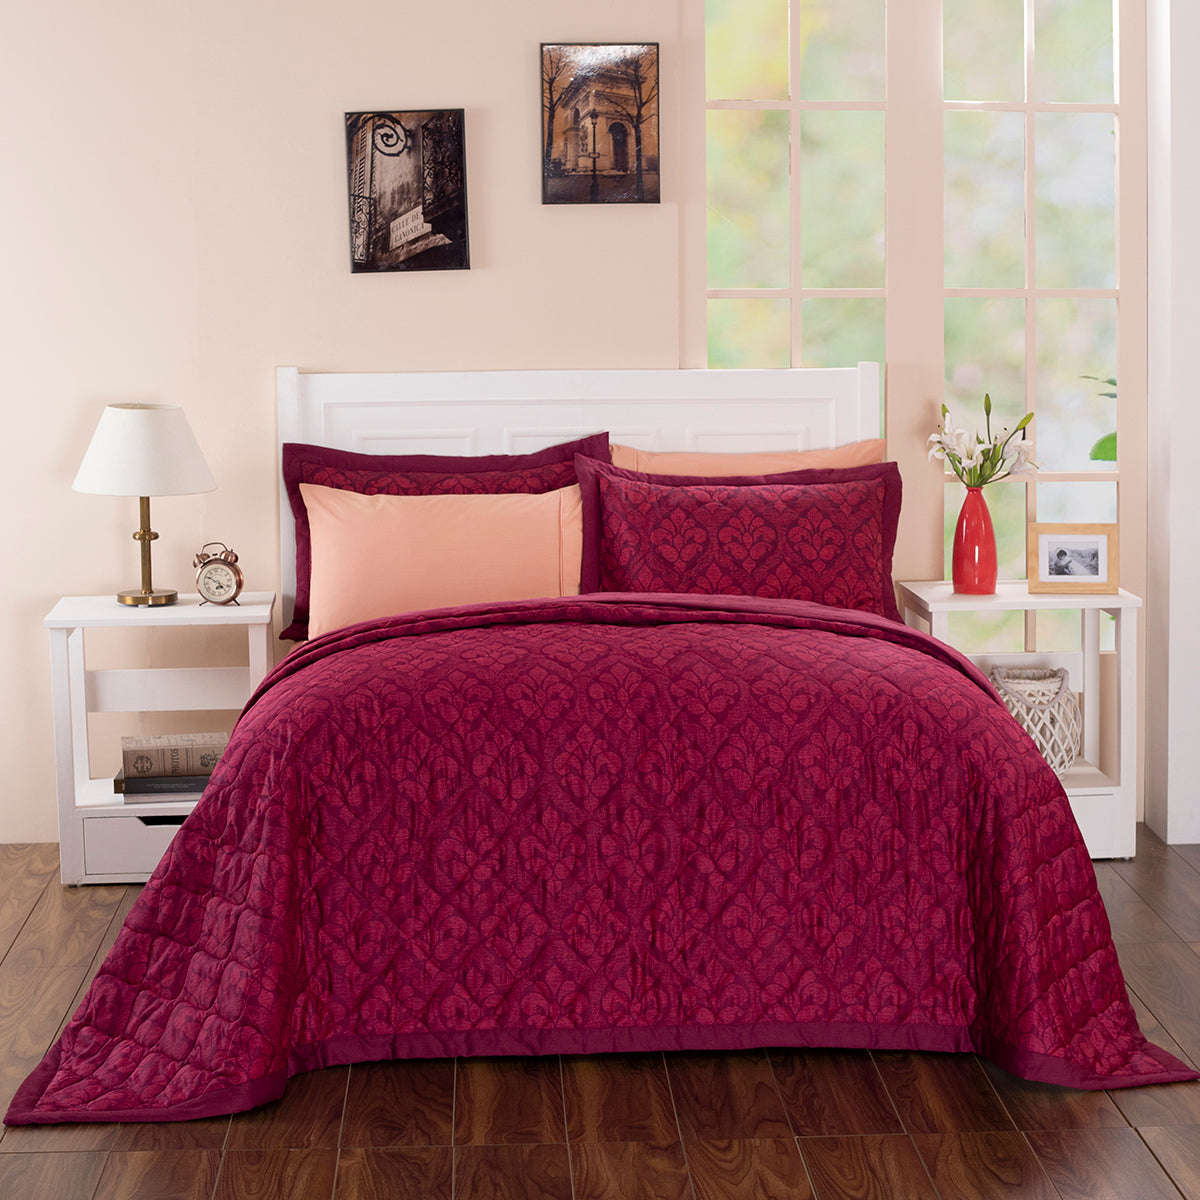 Folklore Transition Diamond Festivity Summer AC Quilt/Quilted Bed Cover/Comforter Red